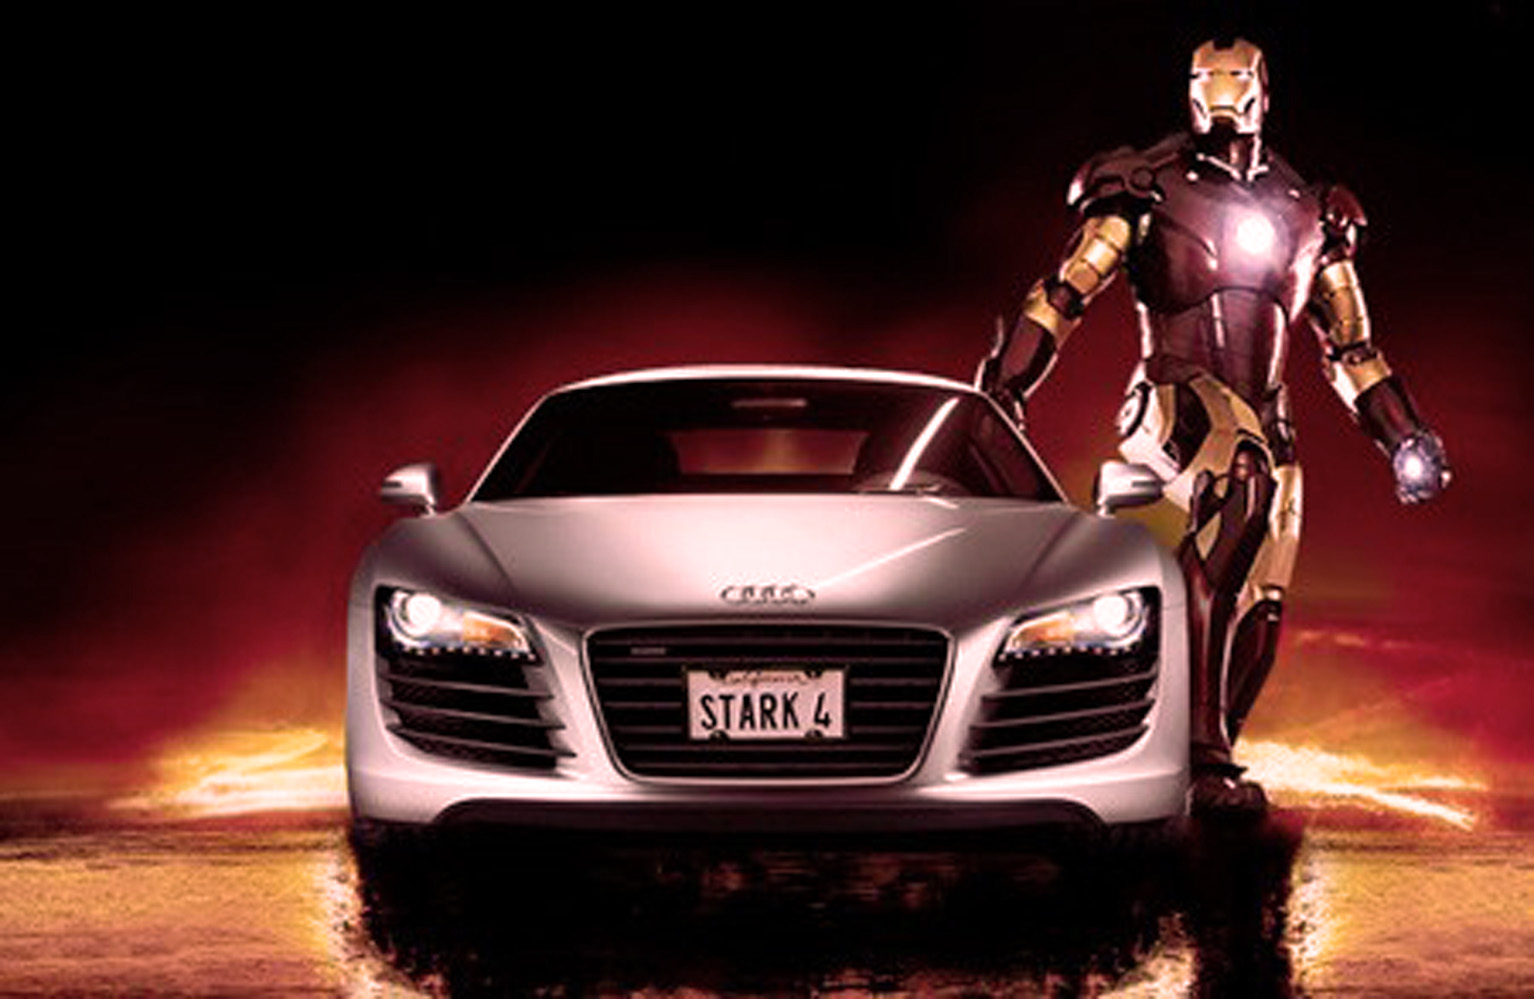 Iron Man 3 Audi R8 Wallpaper in HD Wide High Definition Wallpapers